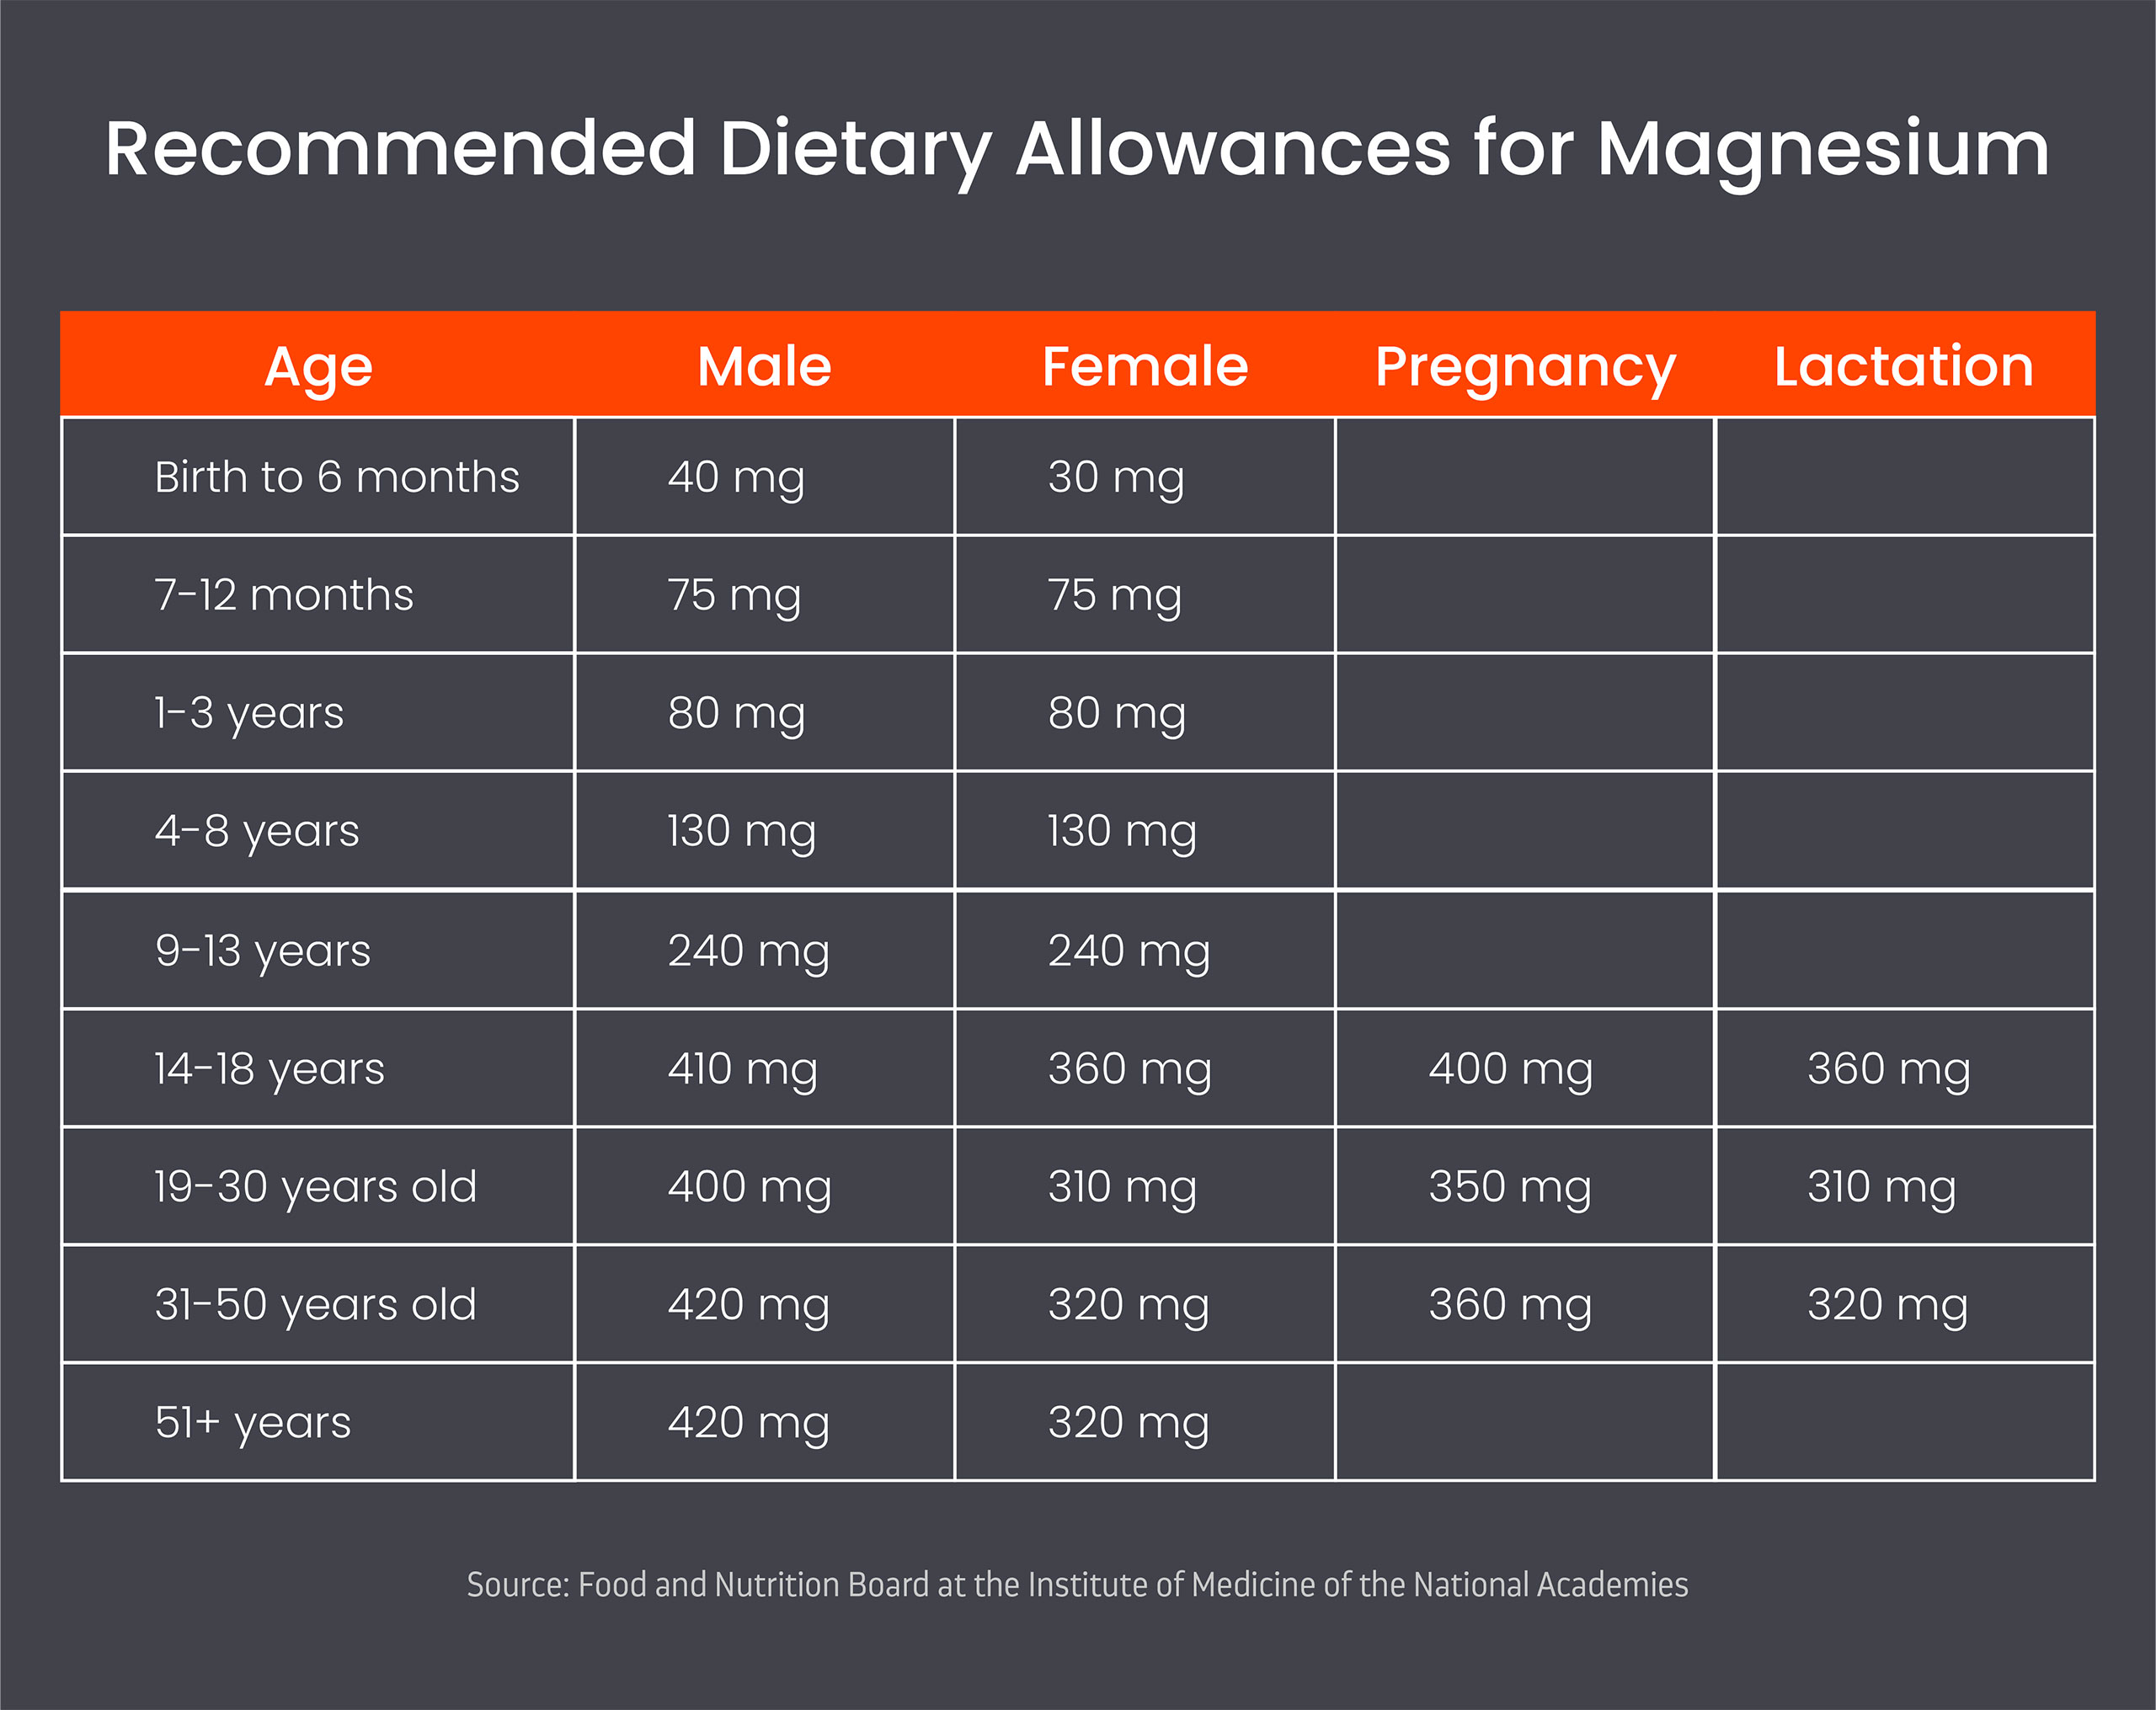 Recommended dietary allowances for magnesium